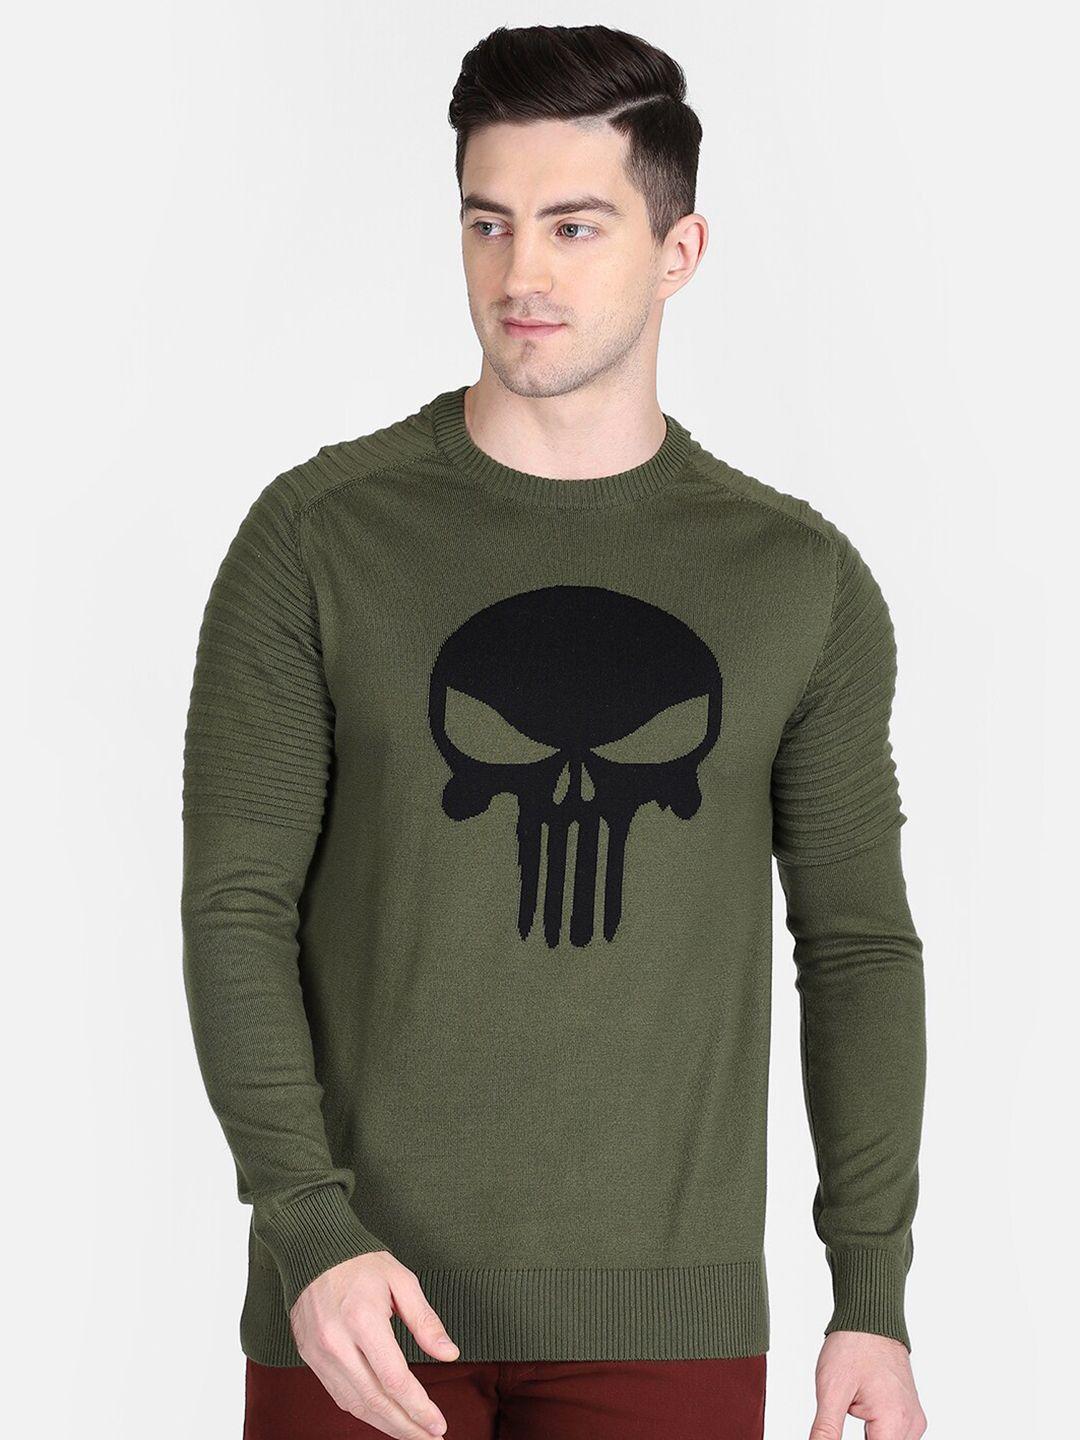 free authority punisher graphic printed sweater